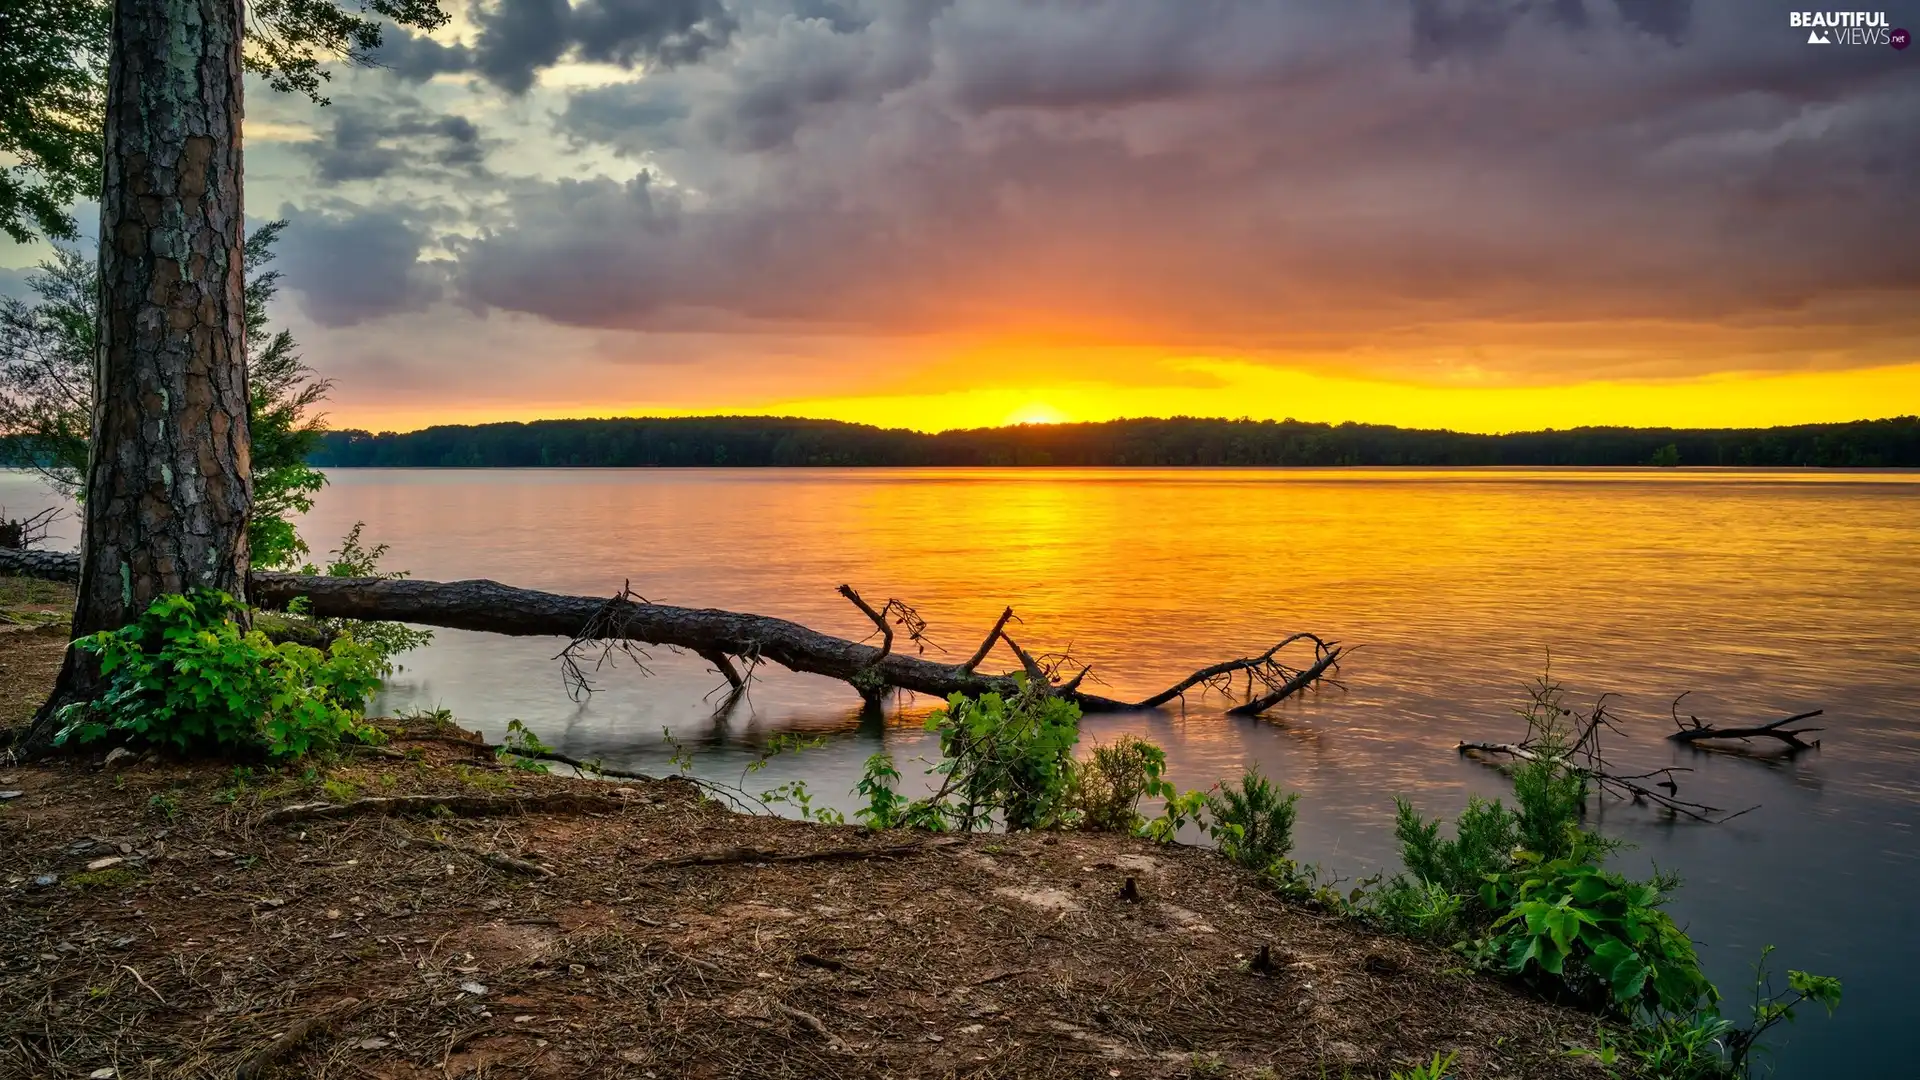 trees, State of Georgia, West Point Lake, Park Glass Bridge Recreation Area, The United States, viewes, Great Sunsets